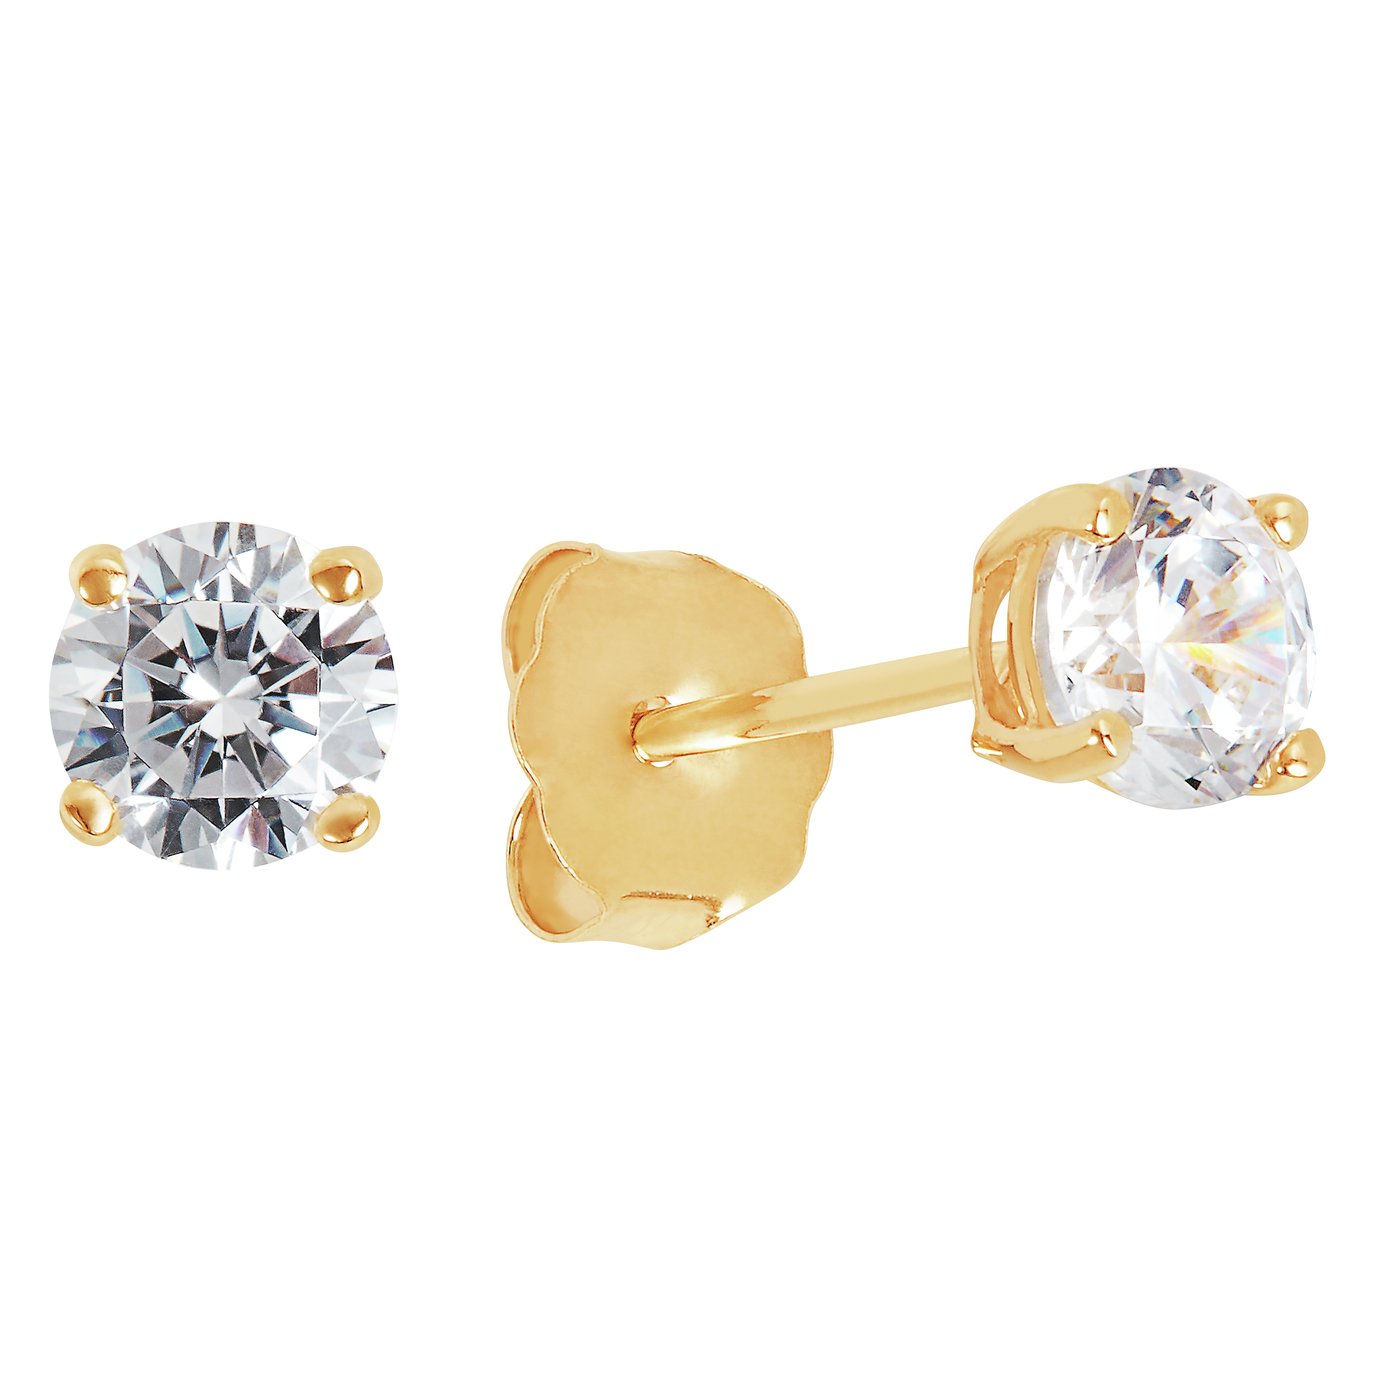 Revere 9ct Gold 4 Claw Cubic Zirconia Stud Earrings